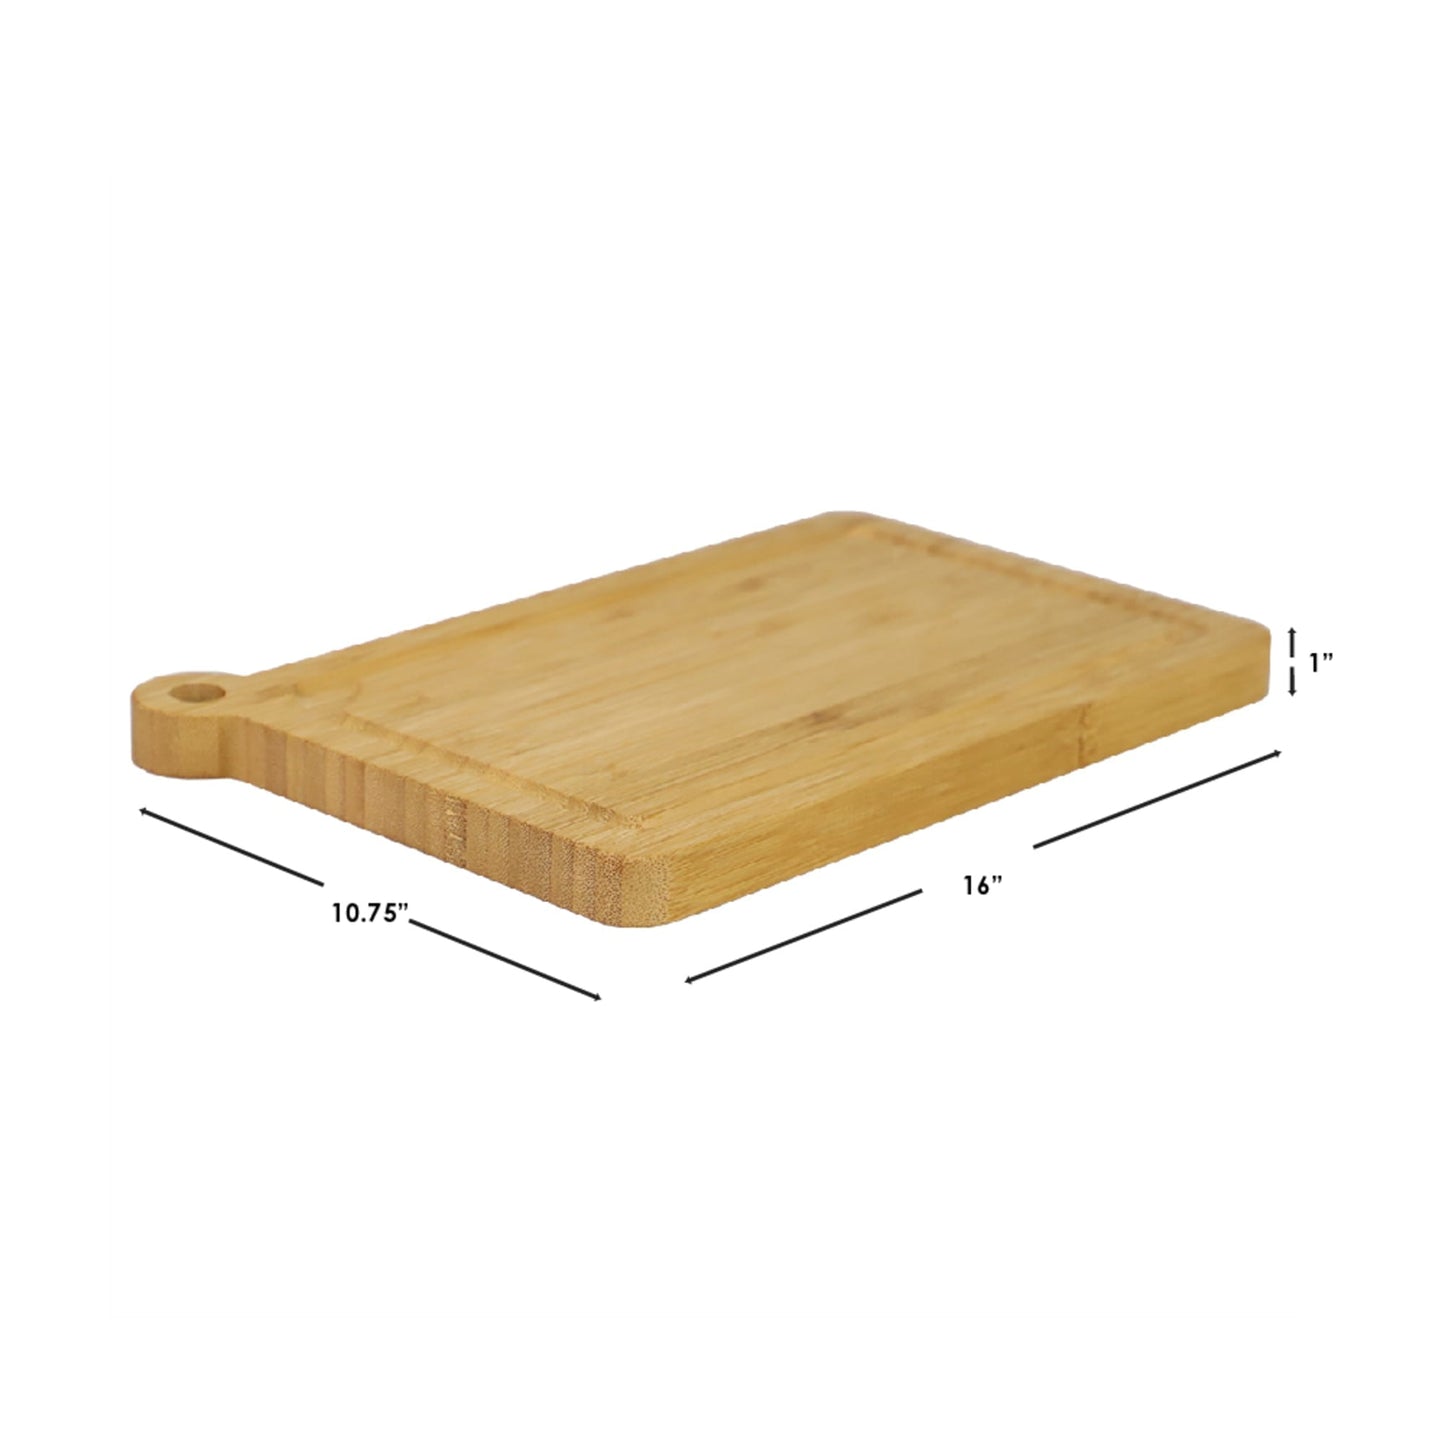 Michael Graves Design Bamboo Cutting Board with Handle, (12" x 16")